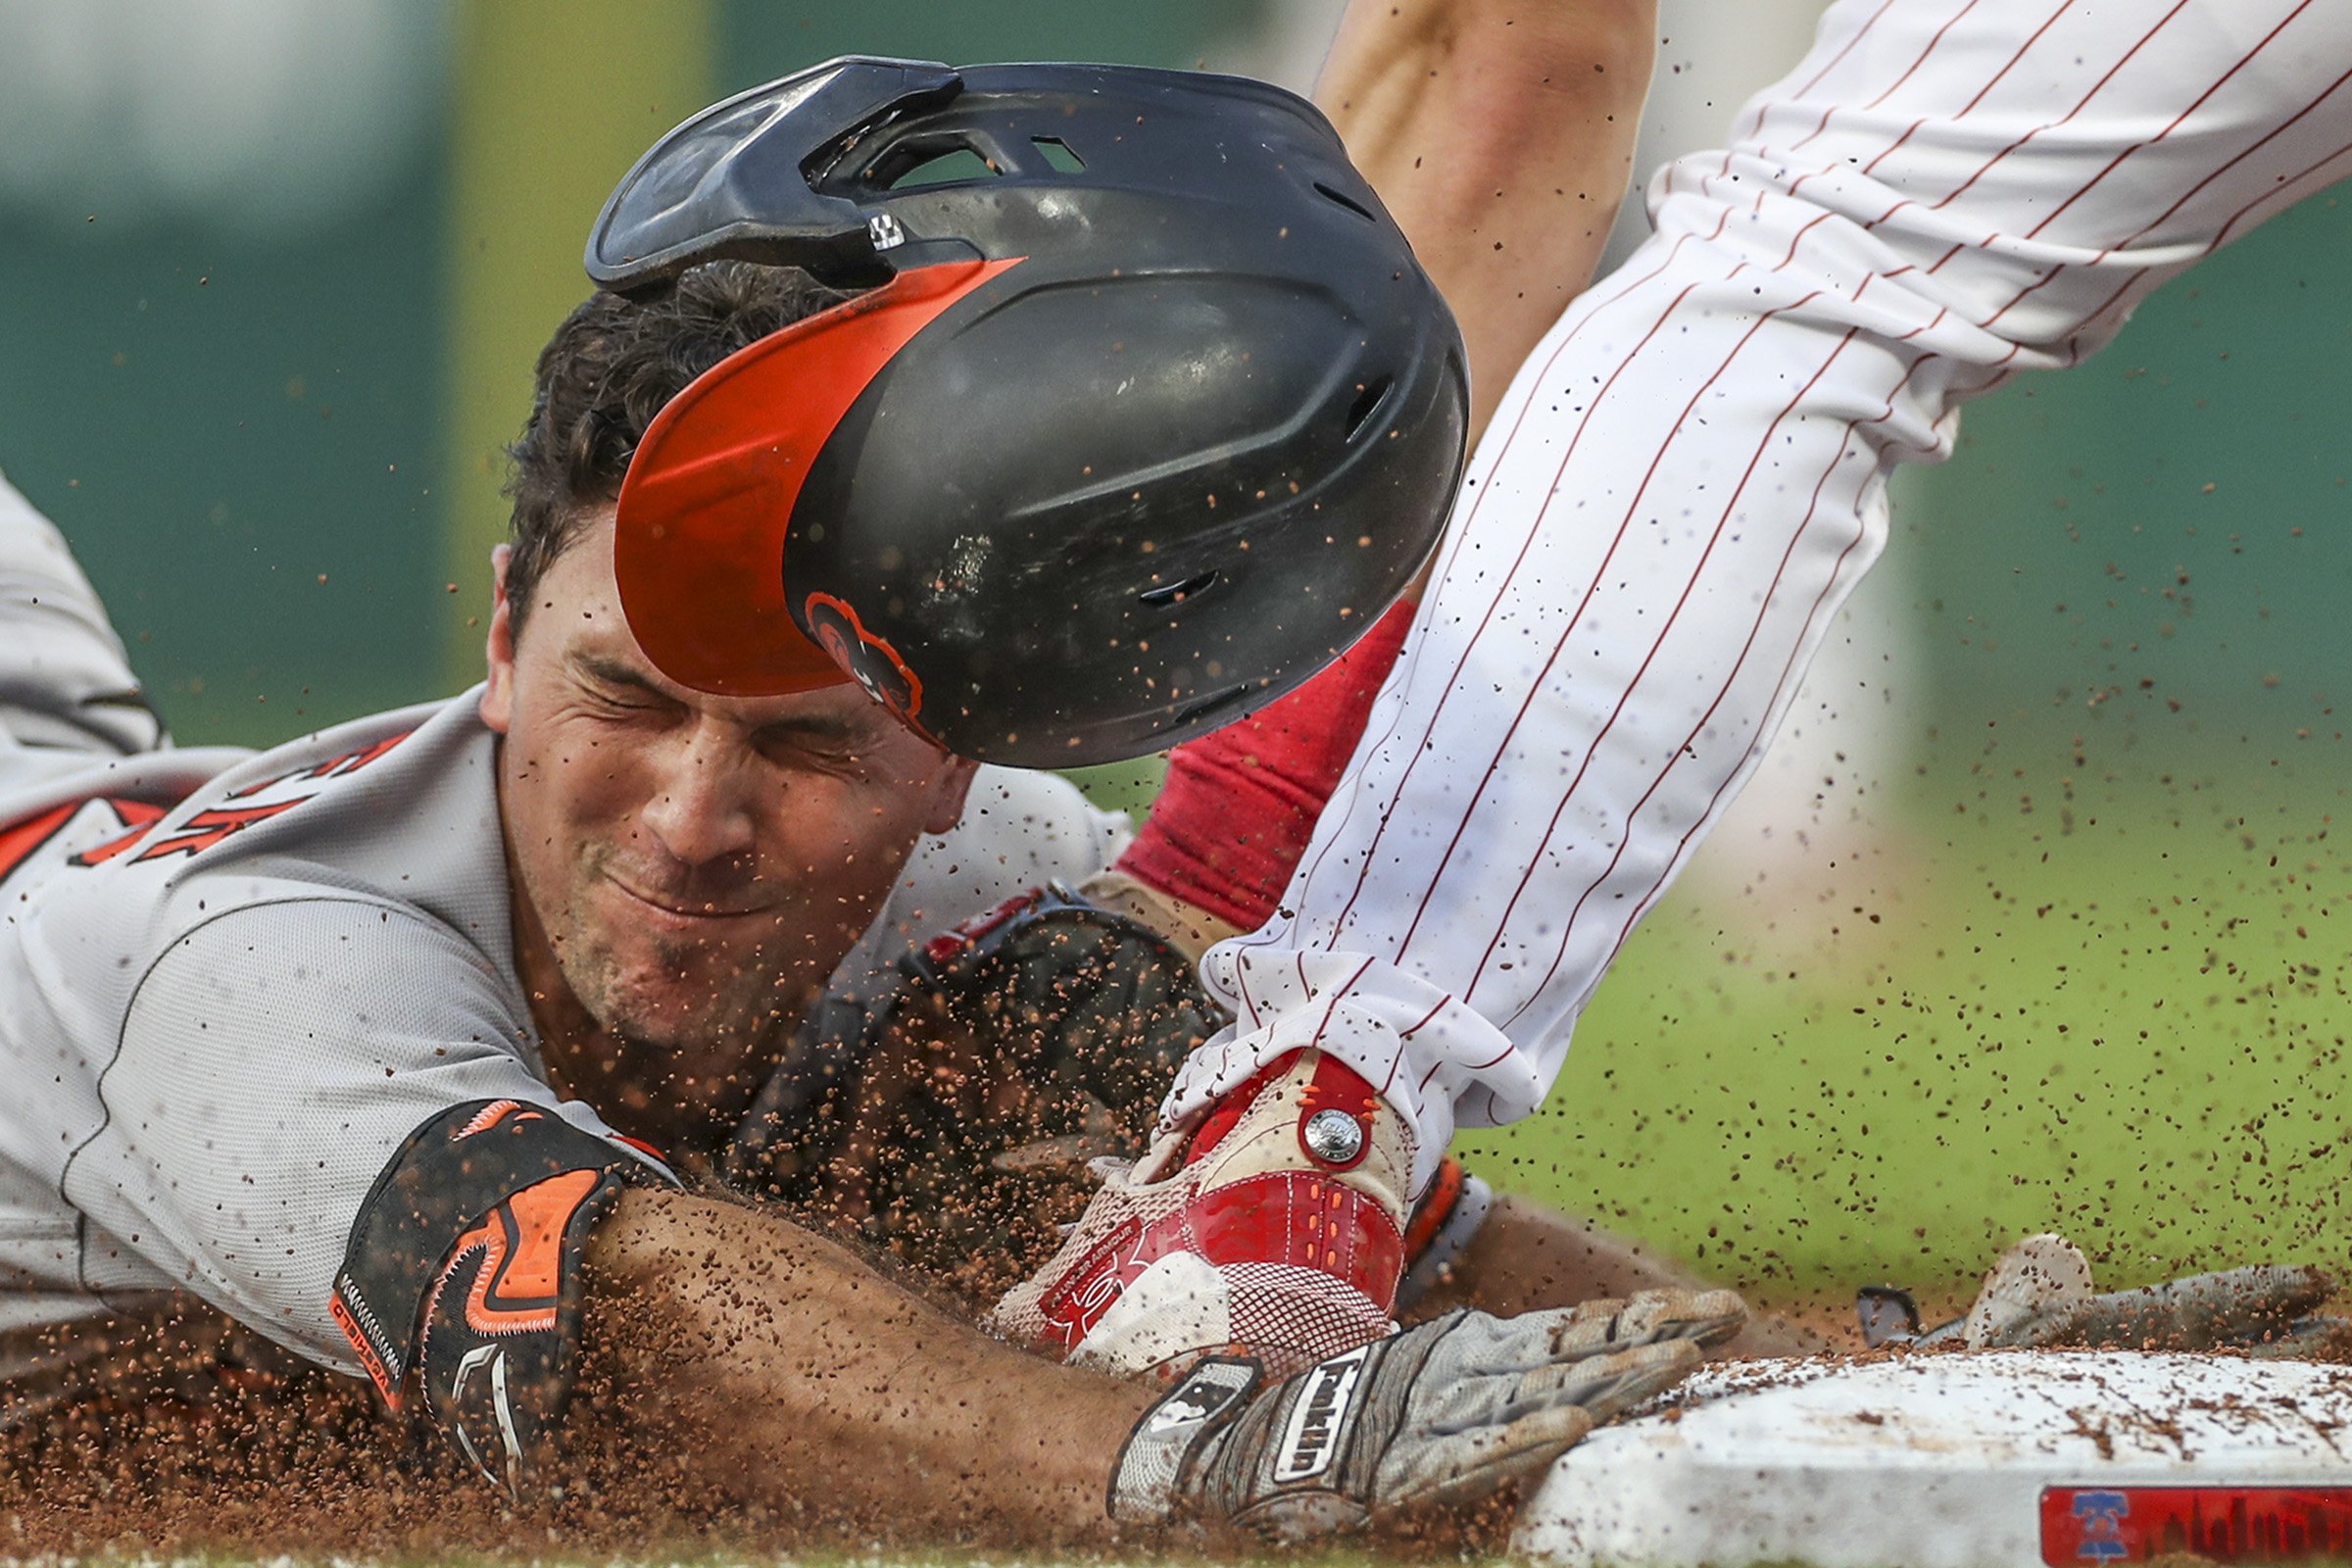  Baltimore Orioles second baseman Adam Frazier loses his helmet as he is tagged out at third base in the third inning of a game against the Philadelphia Phillies at Citizens Bank Park in Philadelphia on  July 25, 2023. 